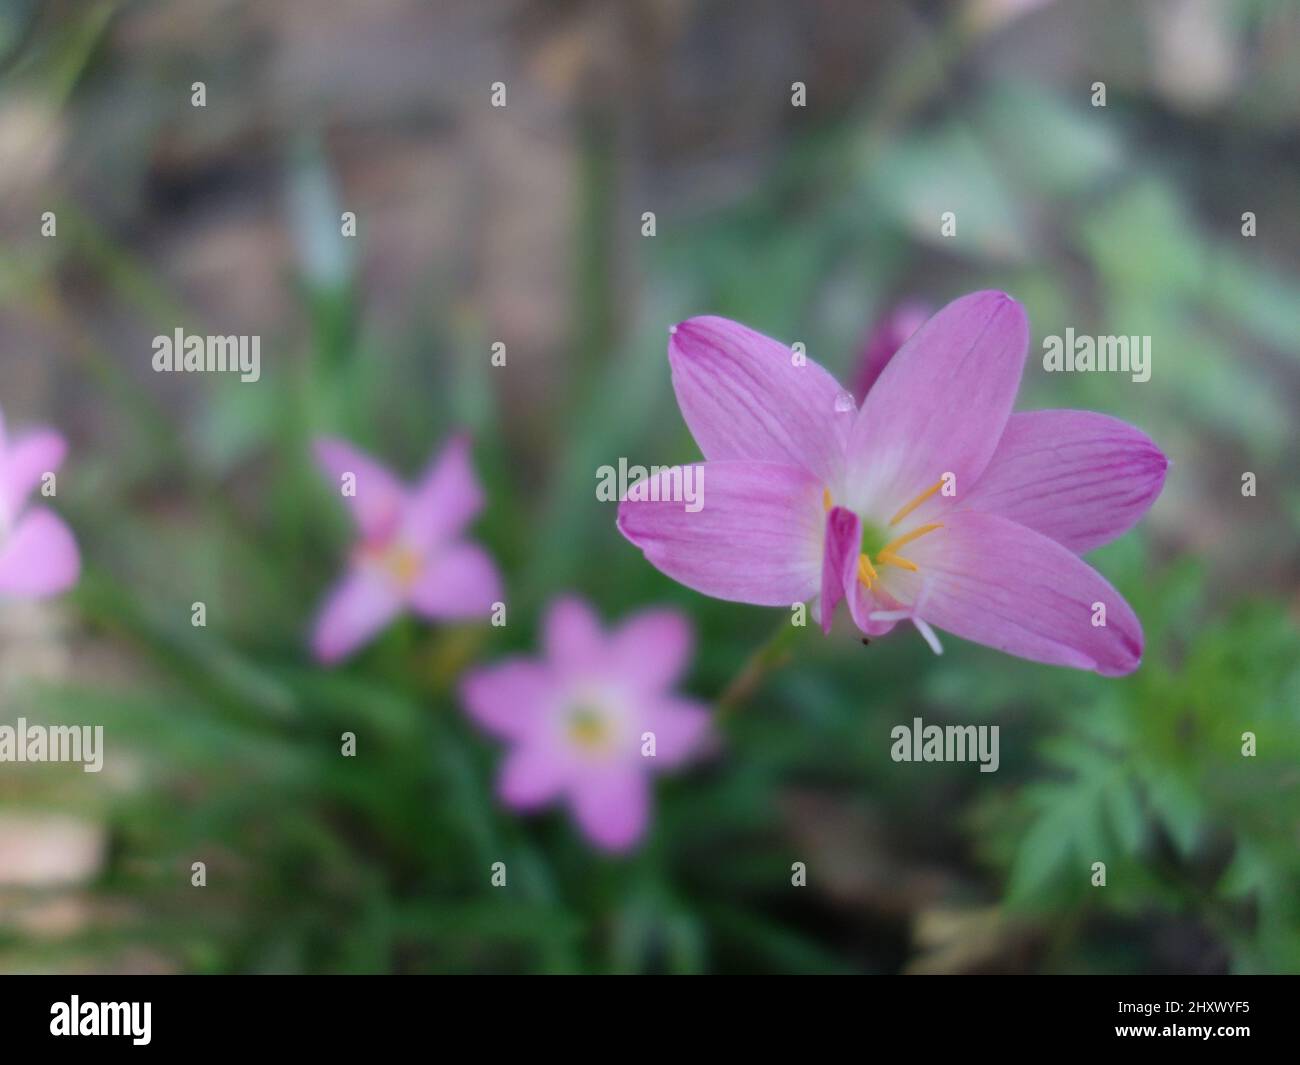 Close-up shot of a zephyranthes minuta flowering plant in the garden with blurred background Stock Photo